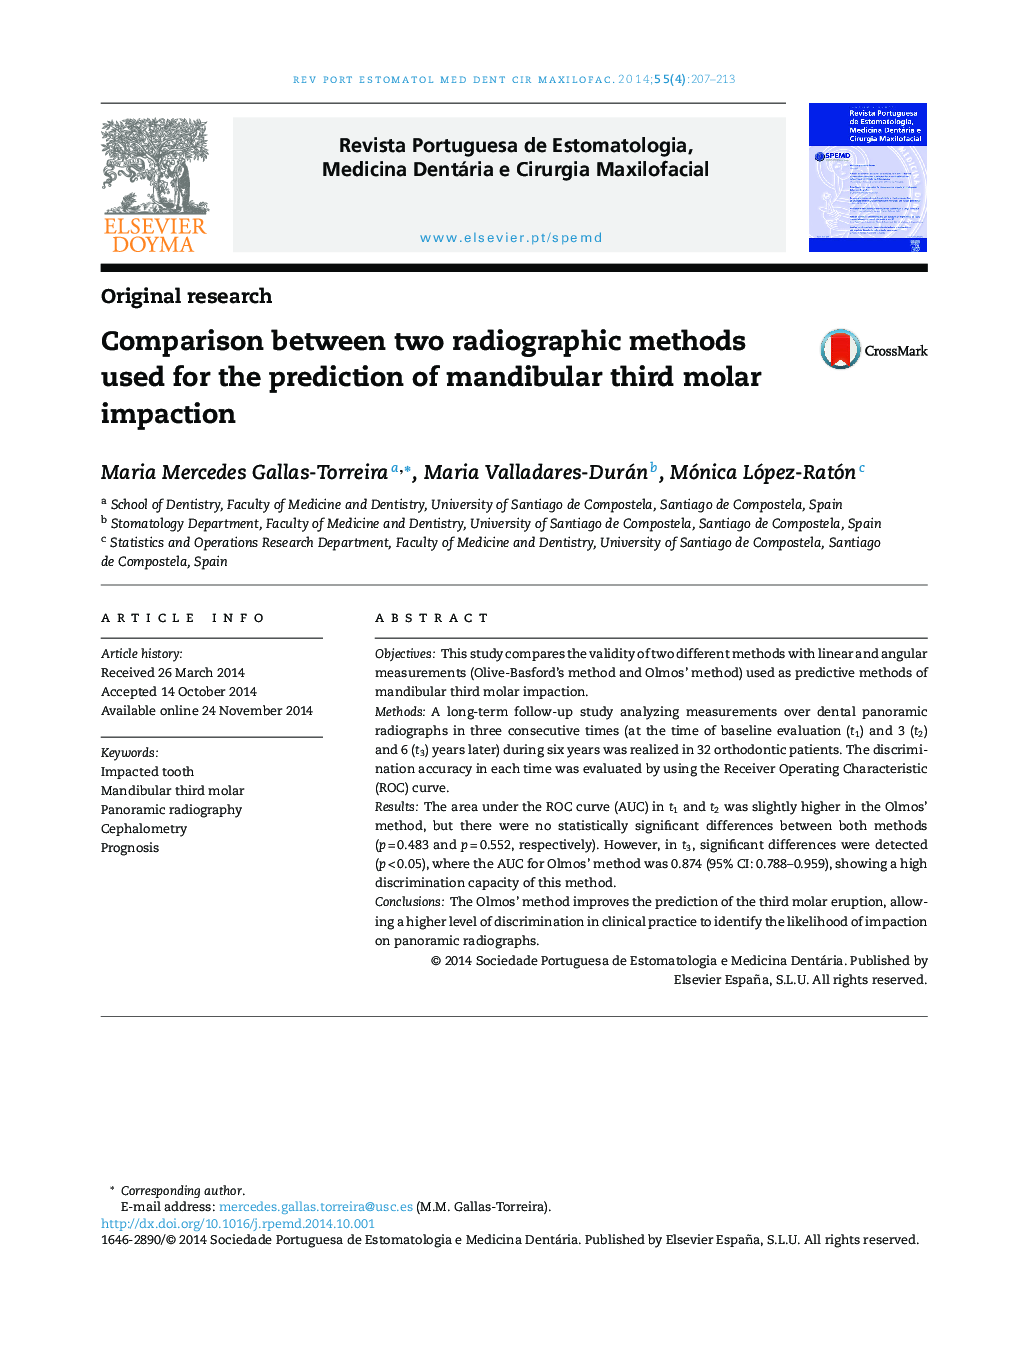 Comparison between two radiographic methods used for the prediction of mandibular third molar impaction